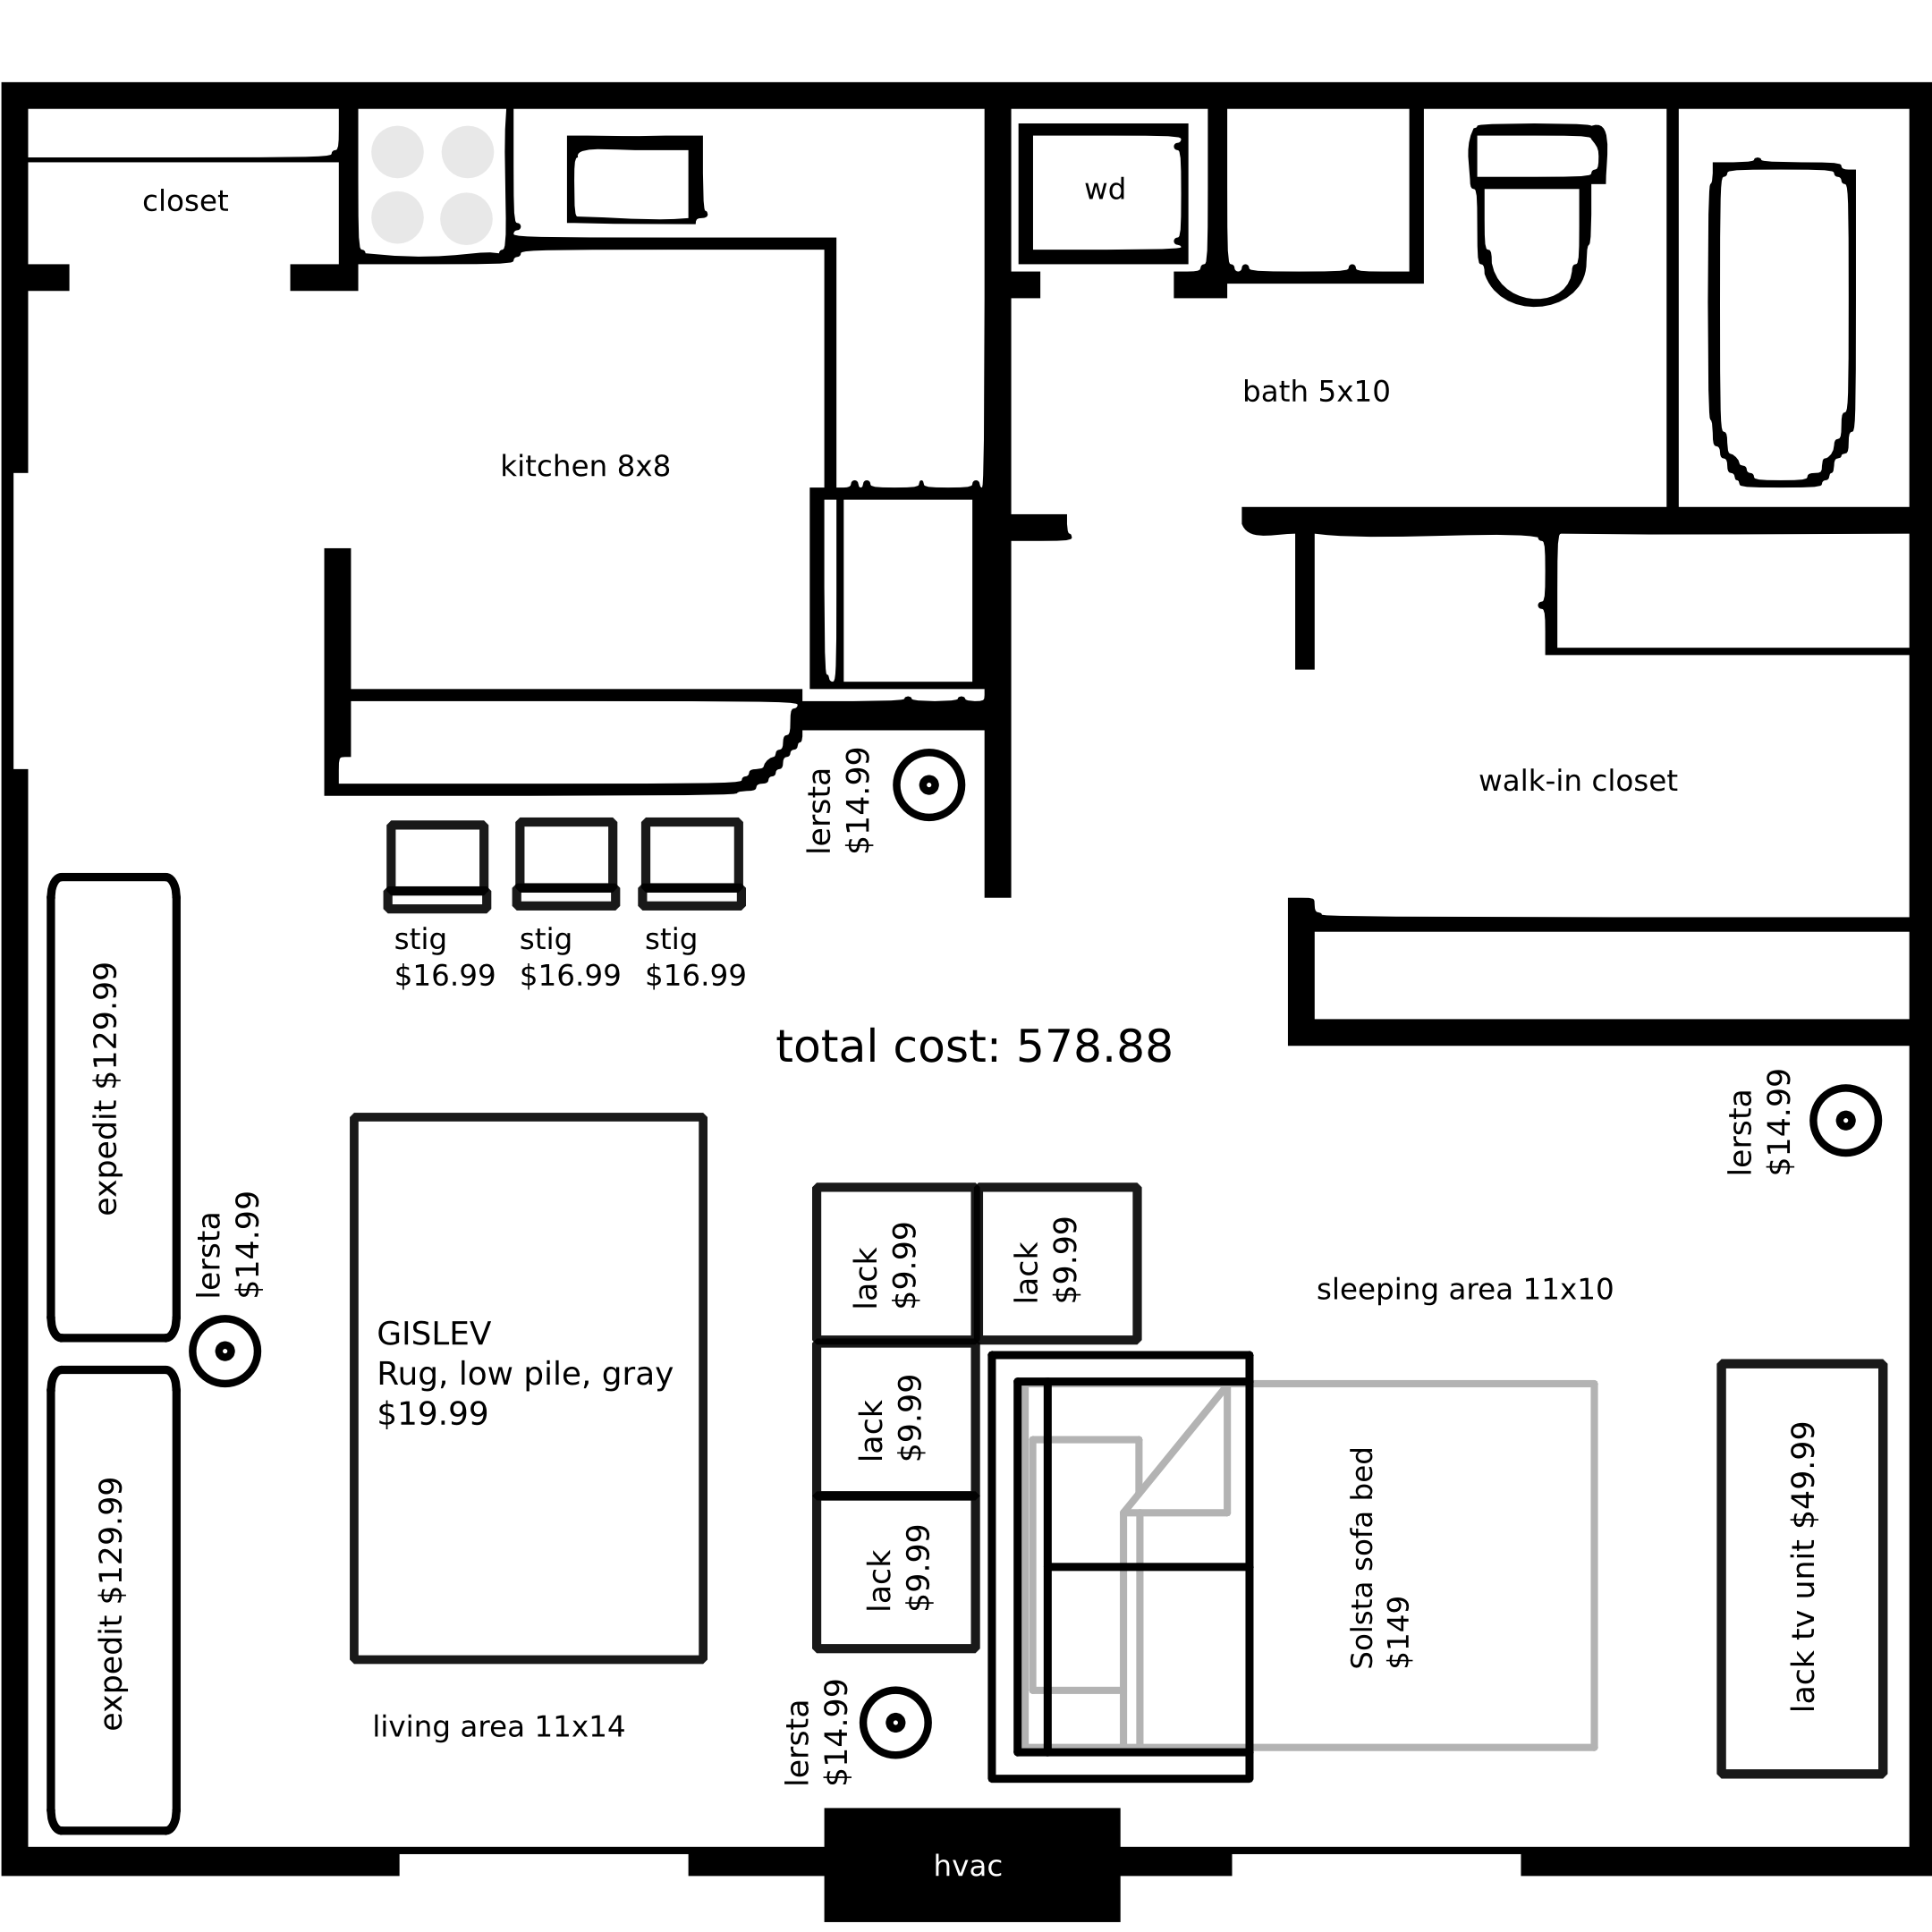 20121201 A studio apartment layout with Ikea furniture by